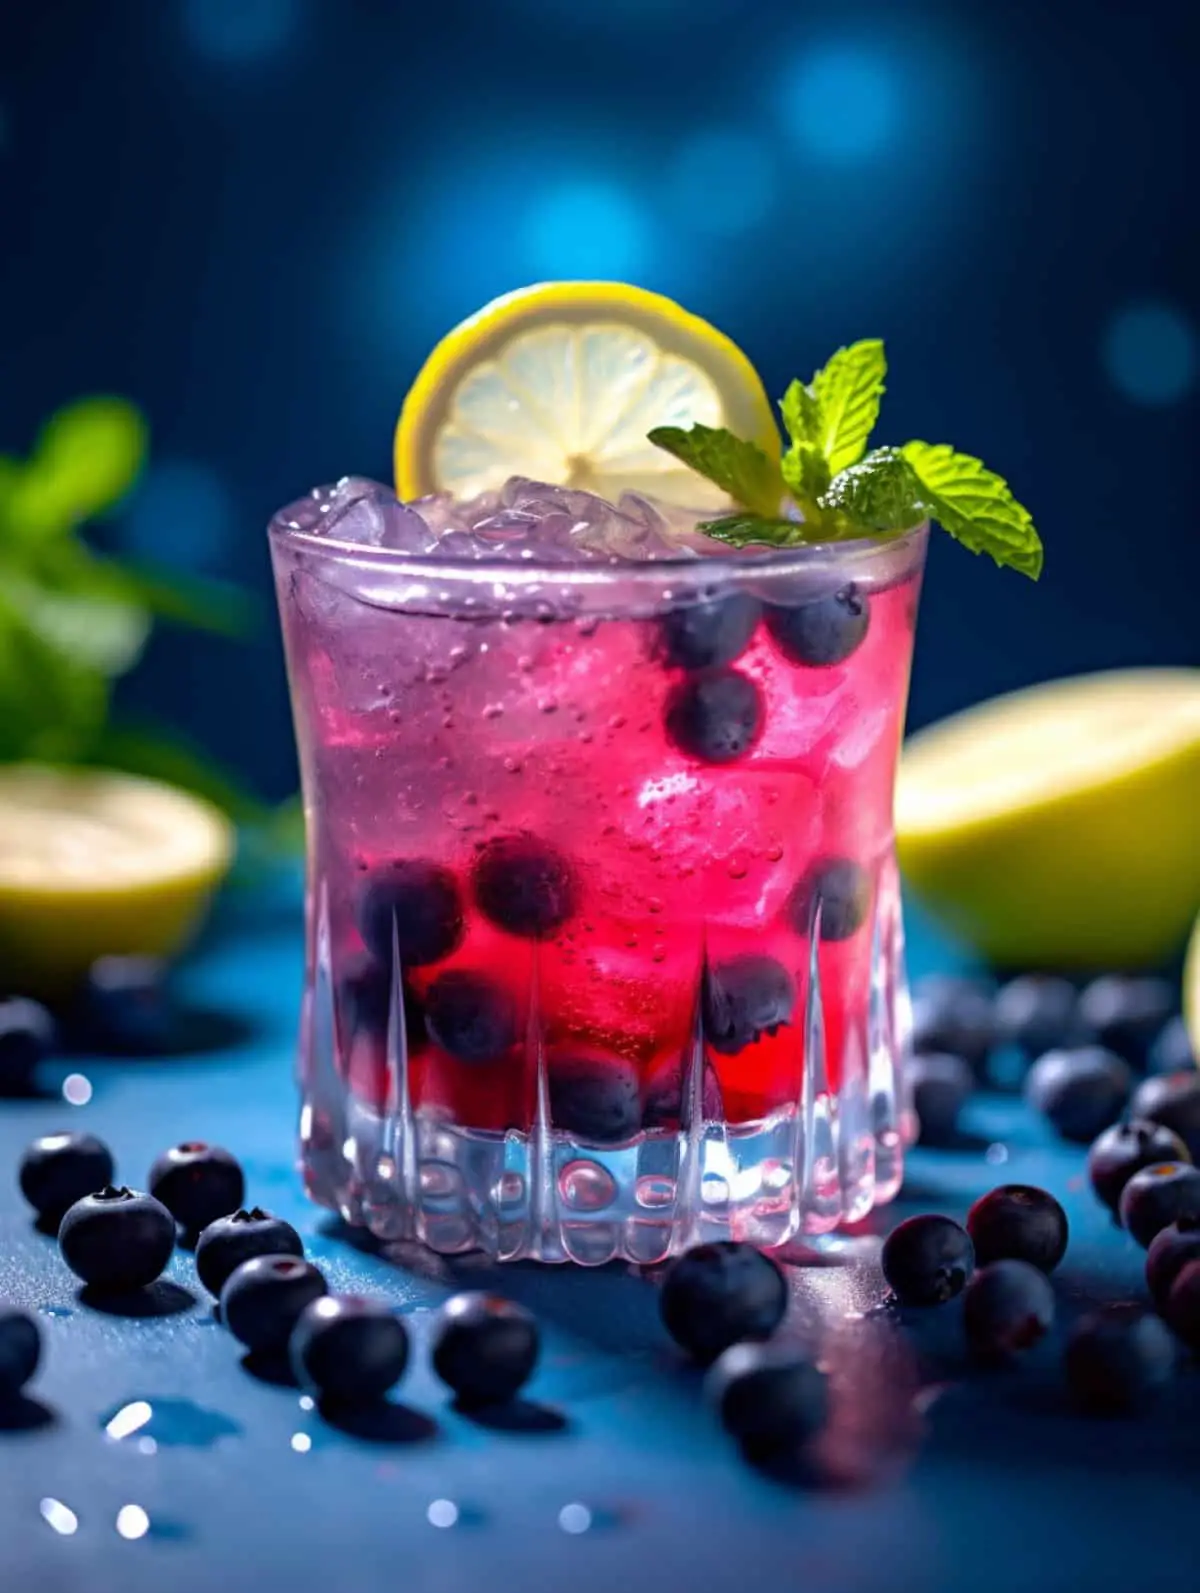 A blueberry cocktail with a lemon slice and fresh blueberries.